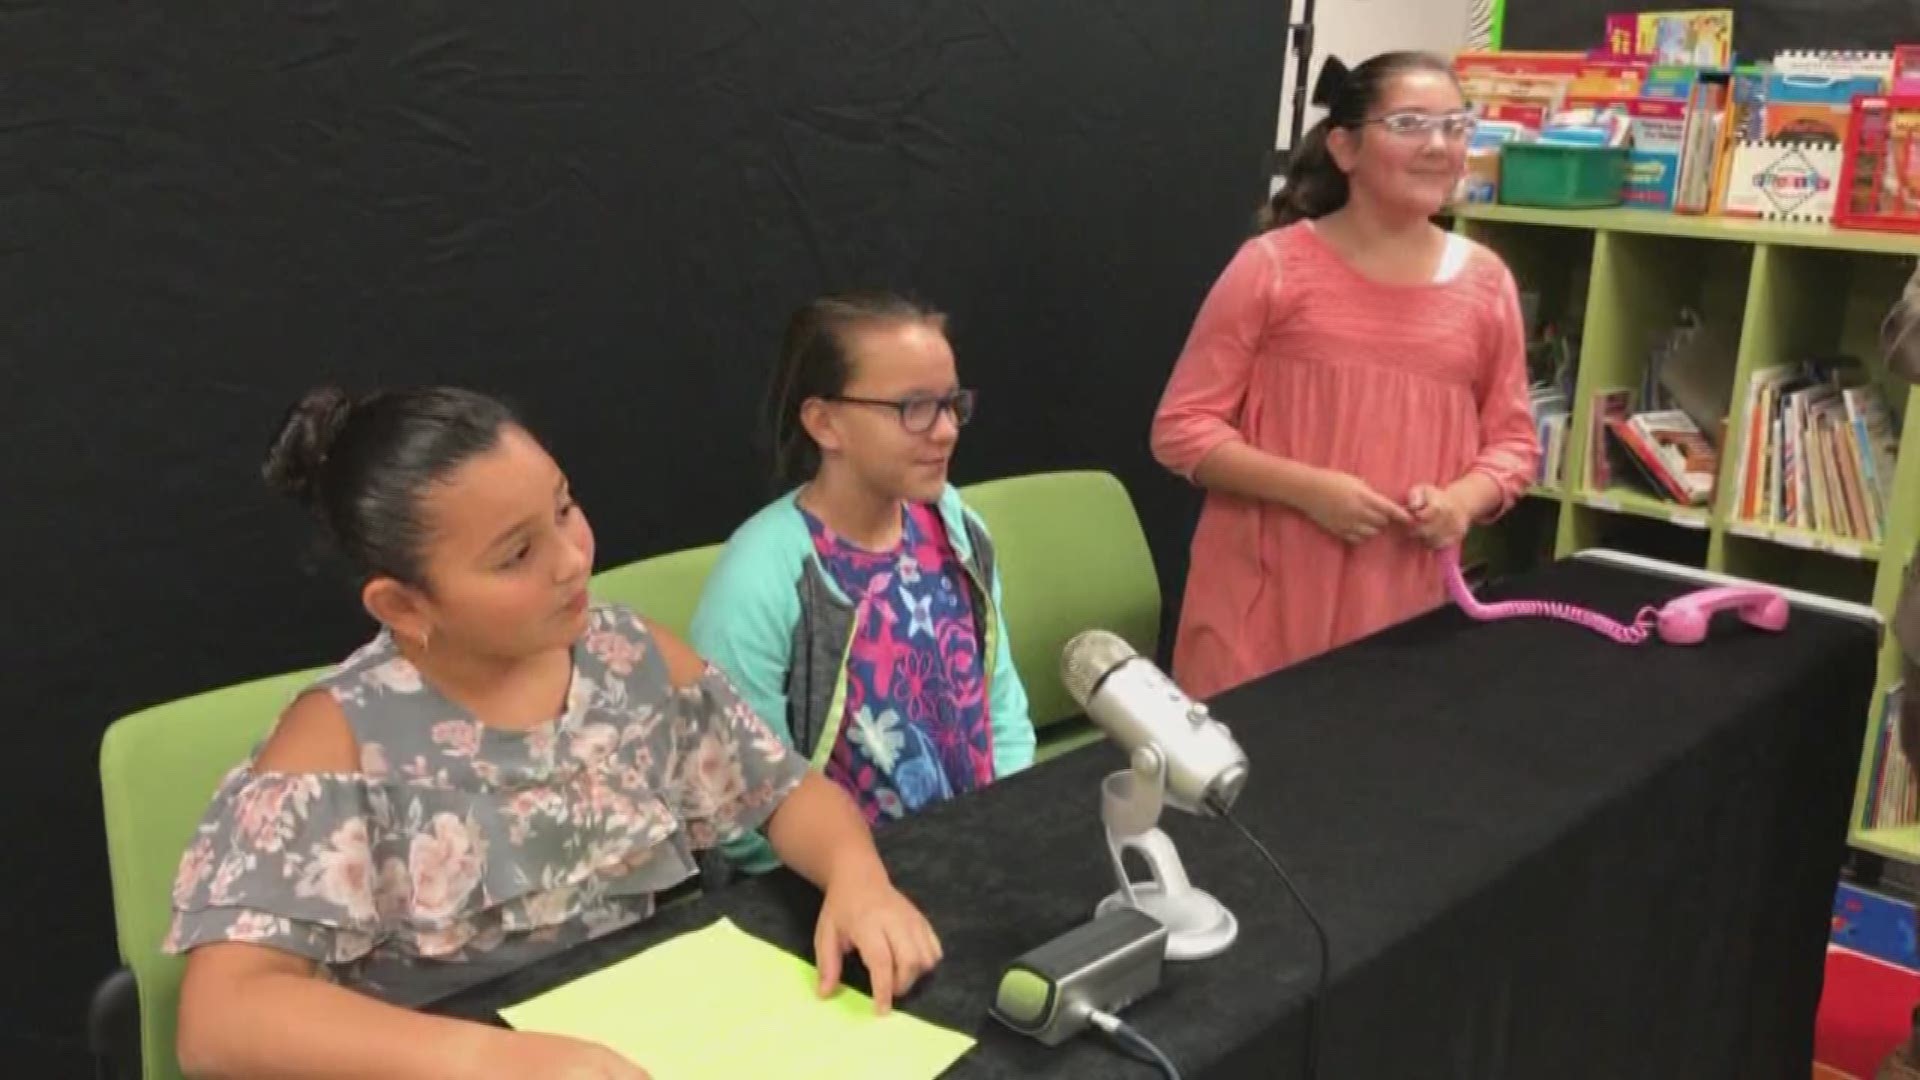 Fifth-grade students are launching a new newscast at Fort Sam Houston Elementary. Teachers created the  "K-cub News Team" to keep students involved and entertained at the start of the day.